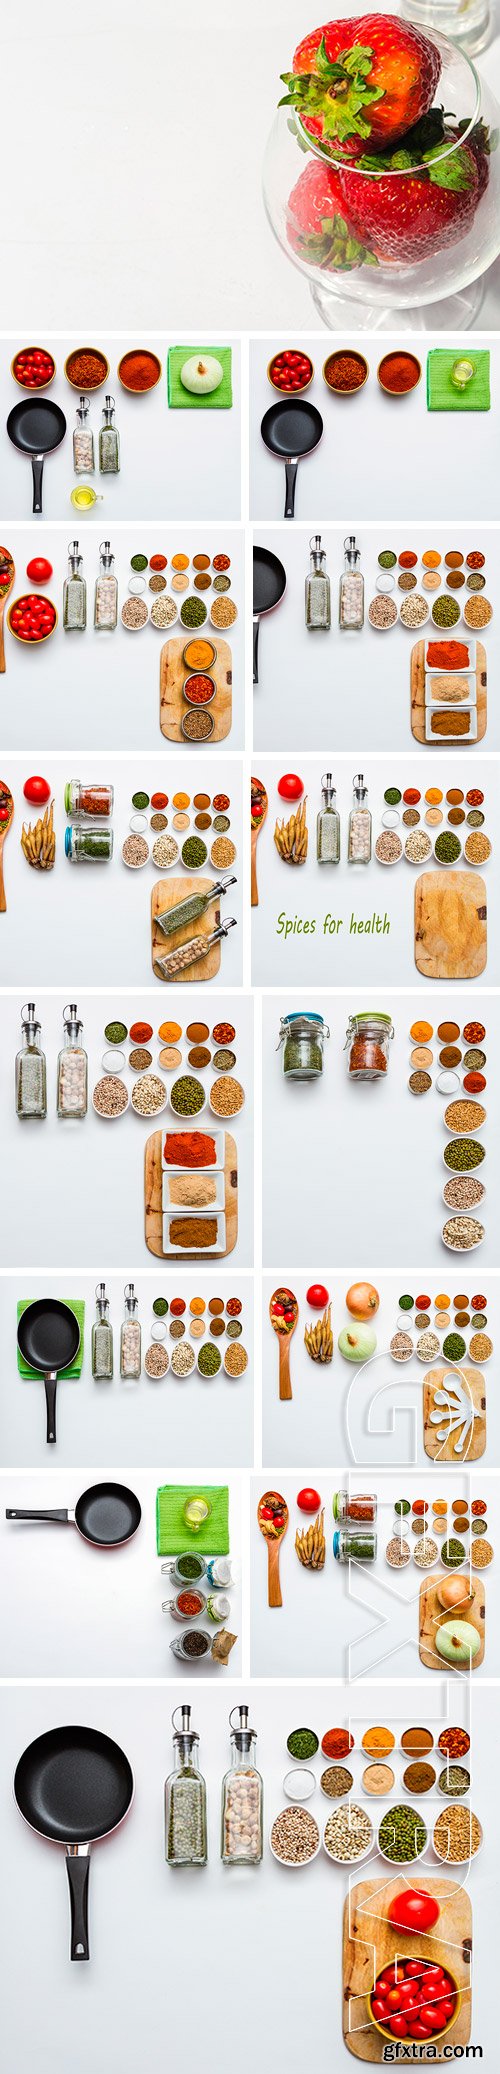 Stock Photos - Spices and herbs selection on white background for decorate design